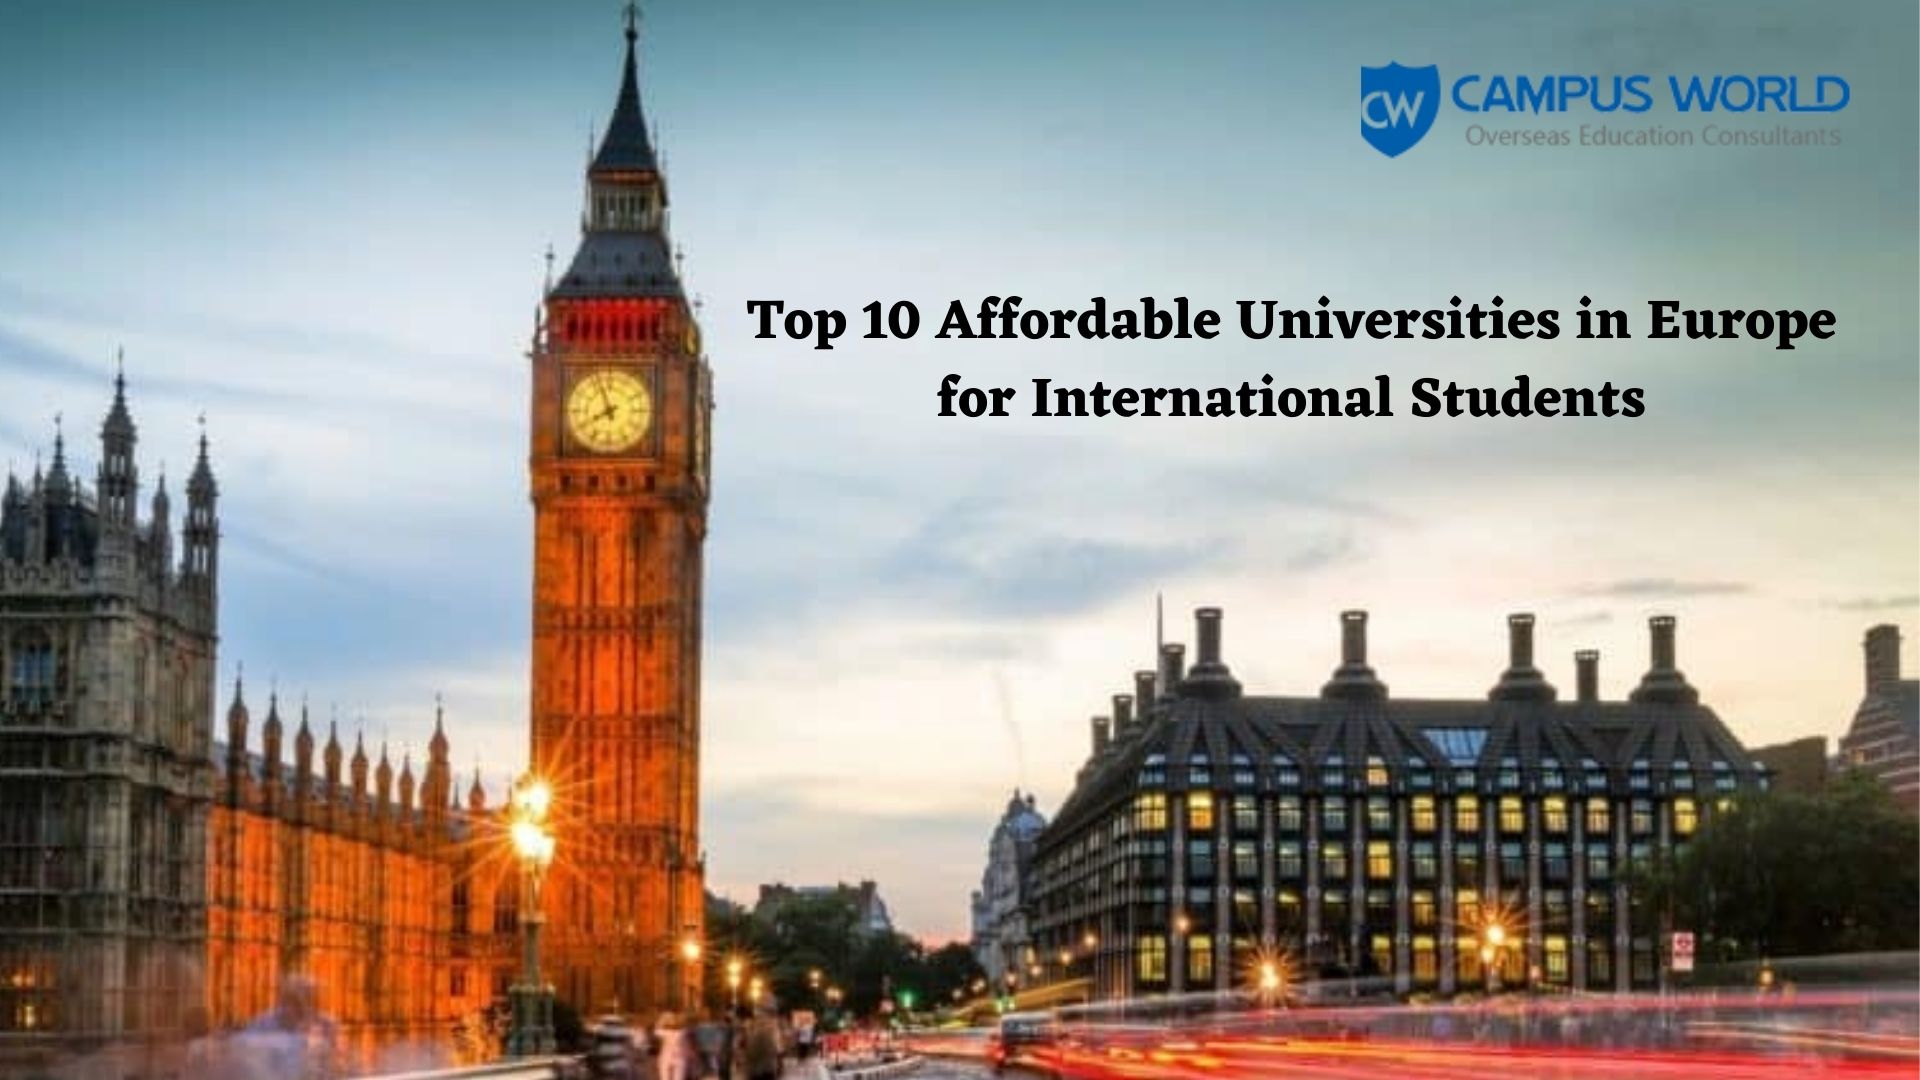 Top 10 Affordable Universities in Europe for International Students